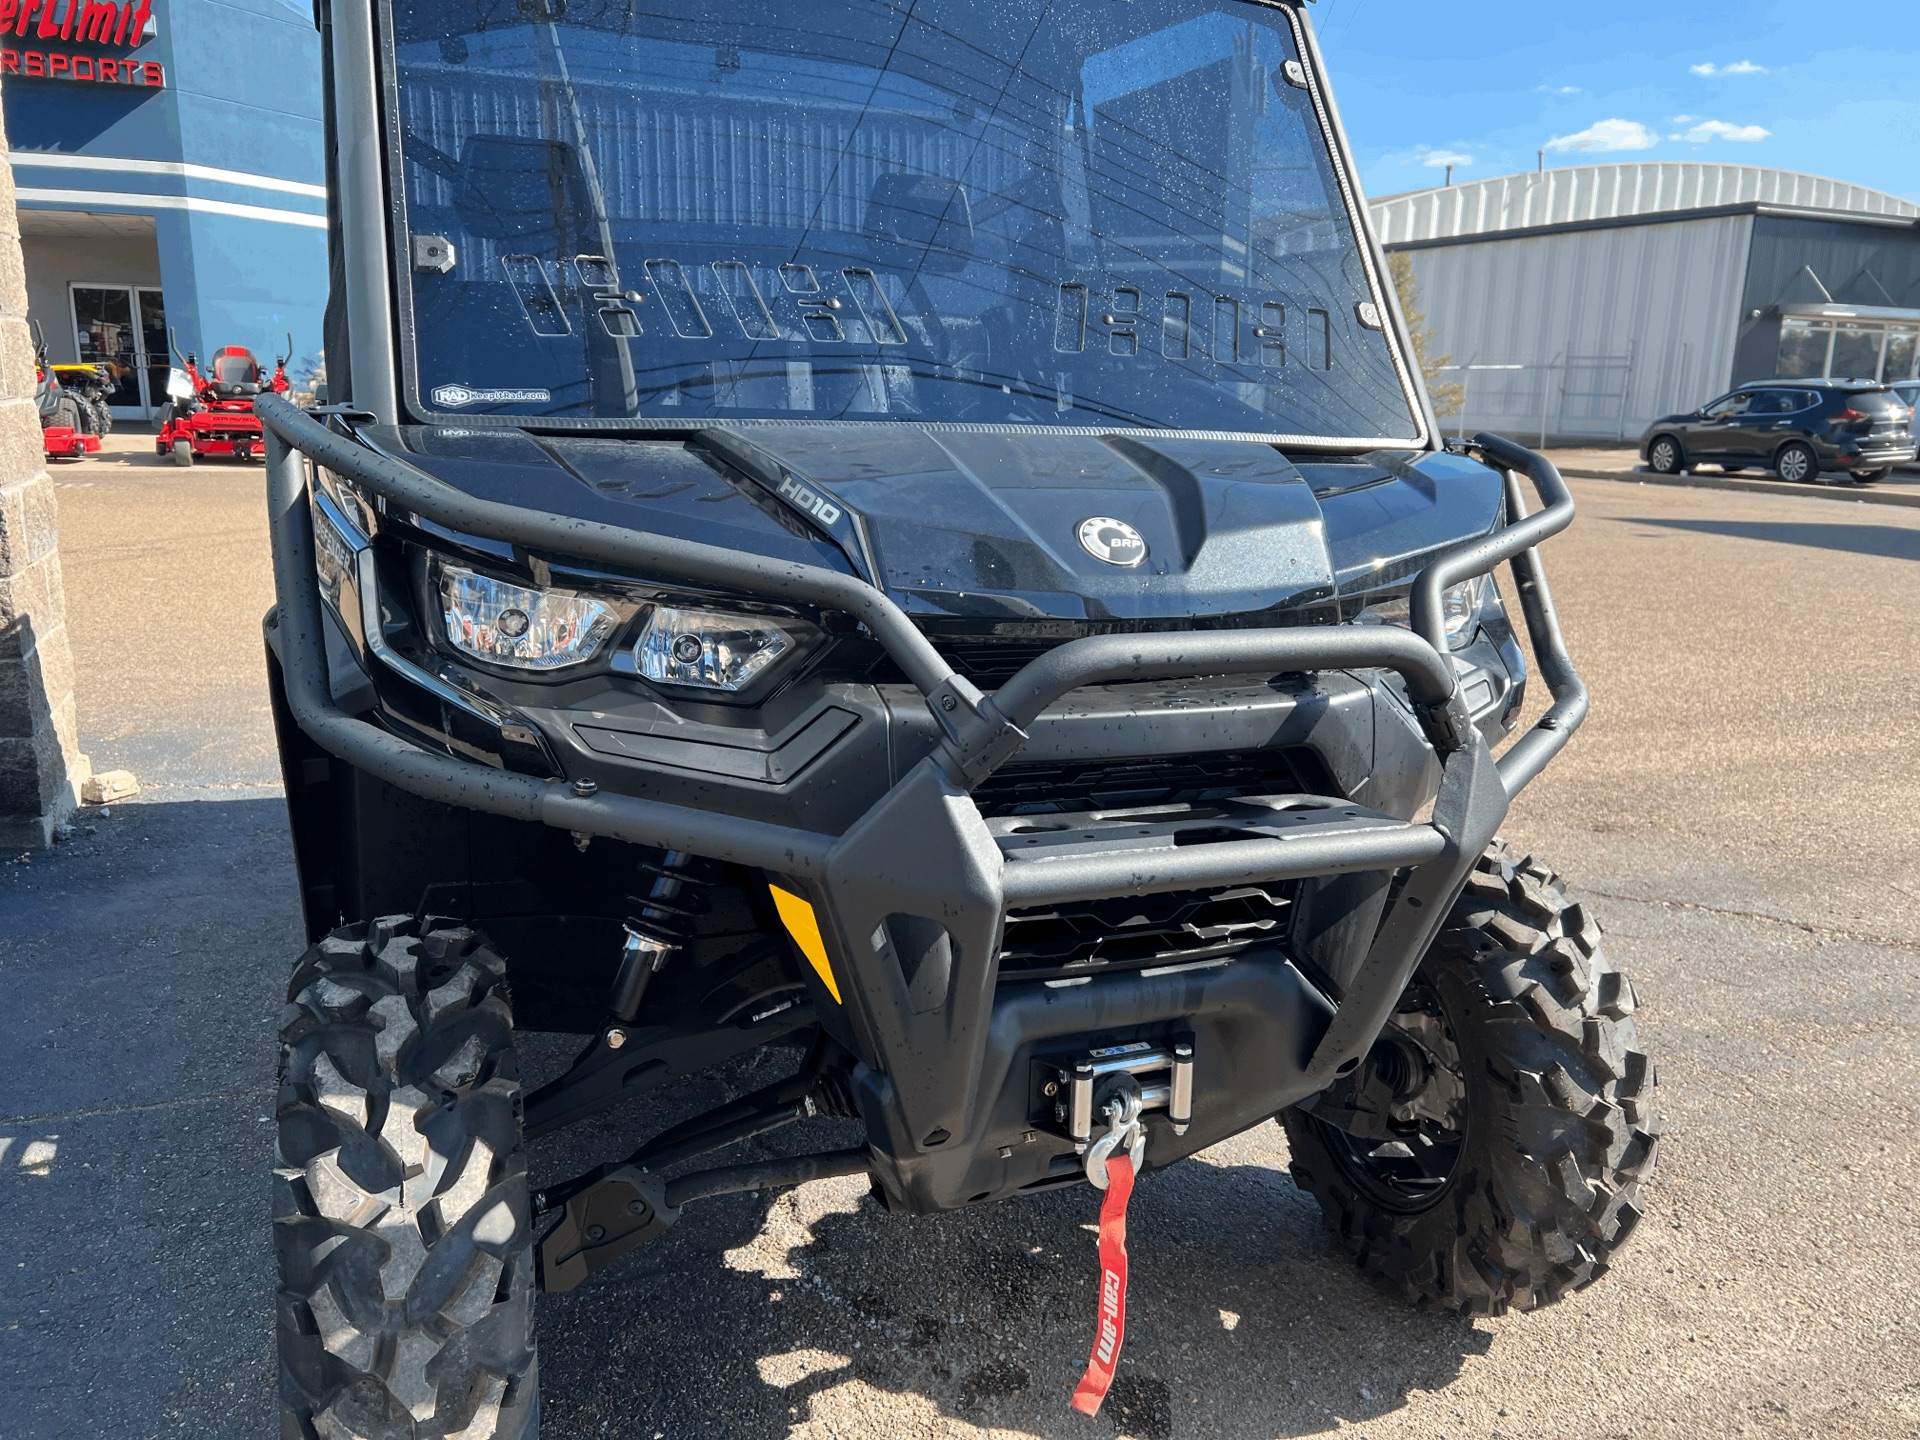 2023 Can-Am Defender XT HD10 in Dyersburg, Tennessee - Photo 7